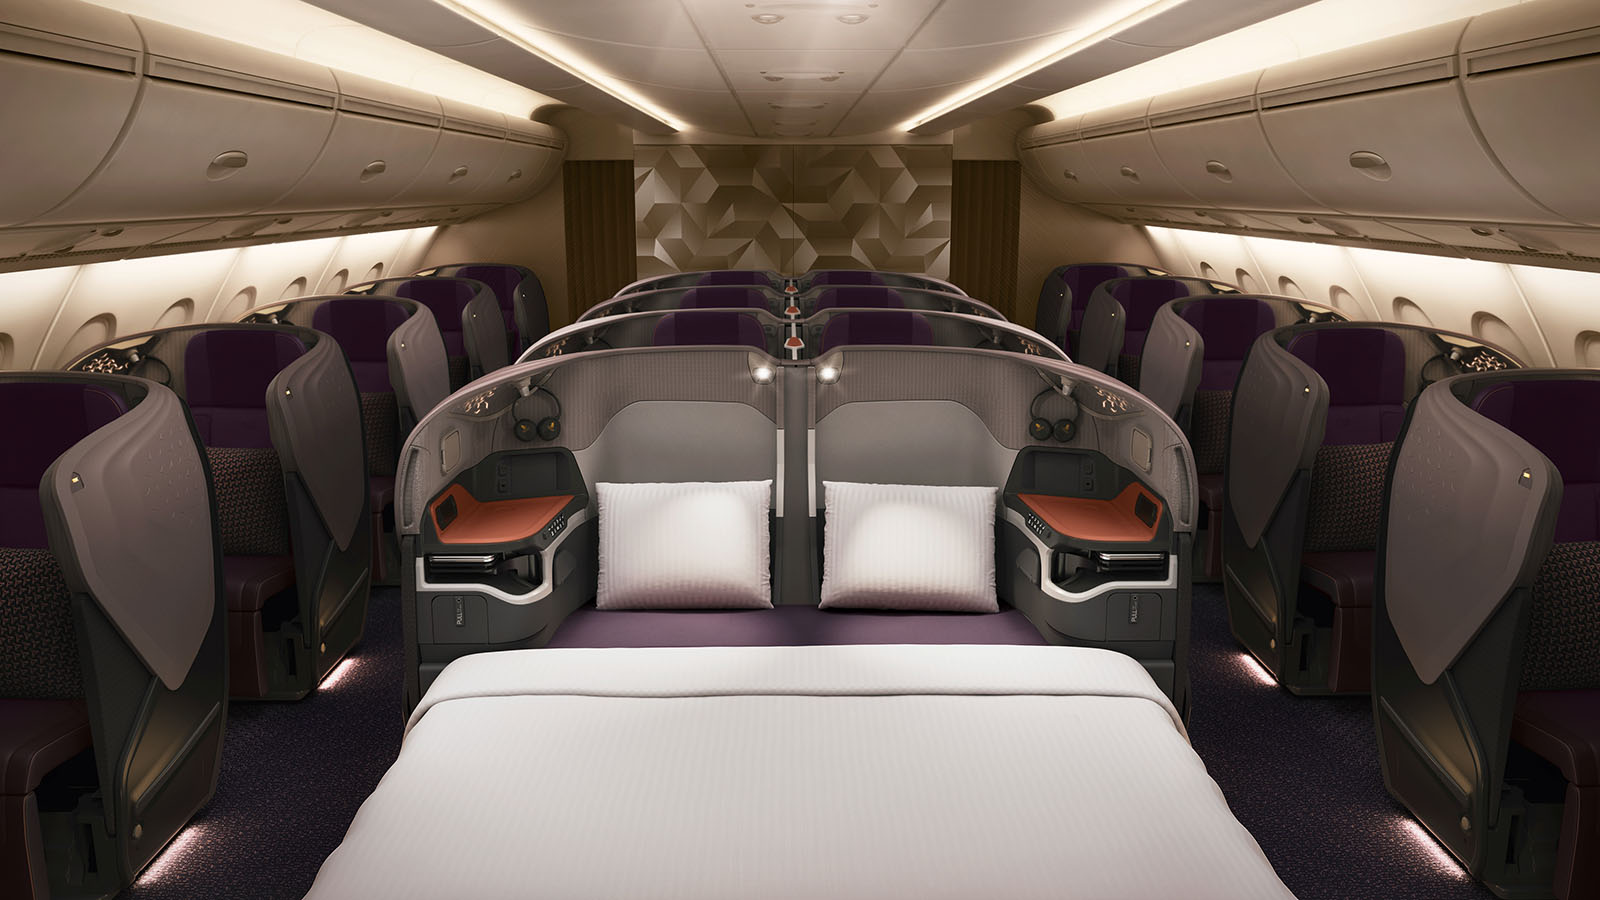 A guide to Singapore Airlines' Business and First Class seats and suites